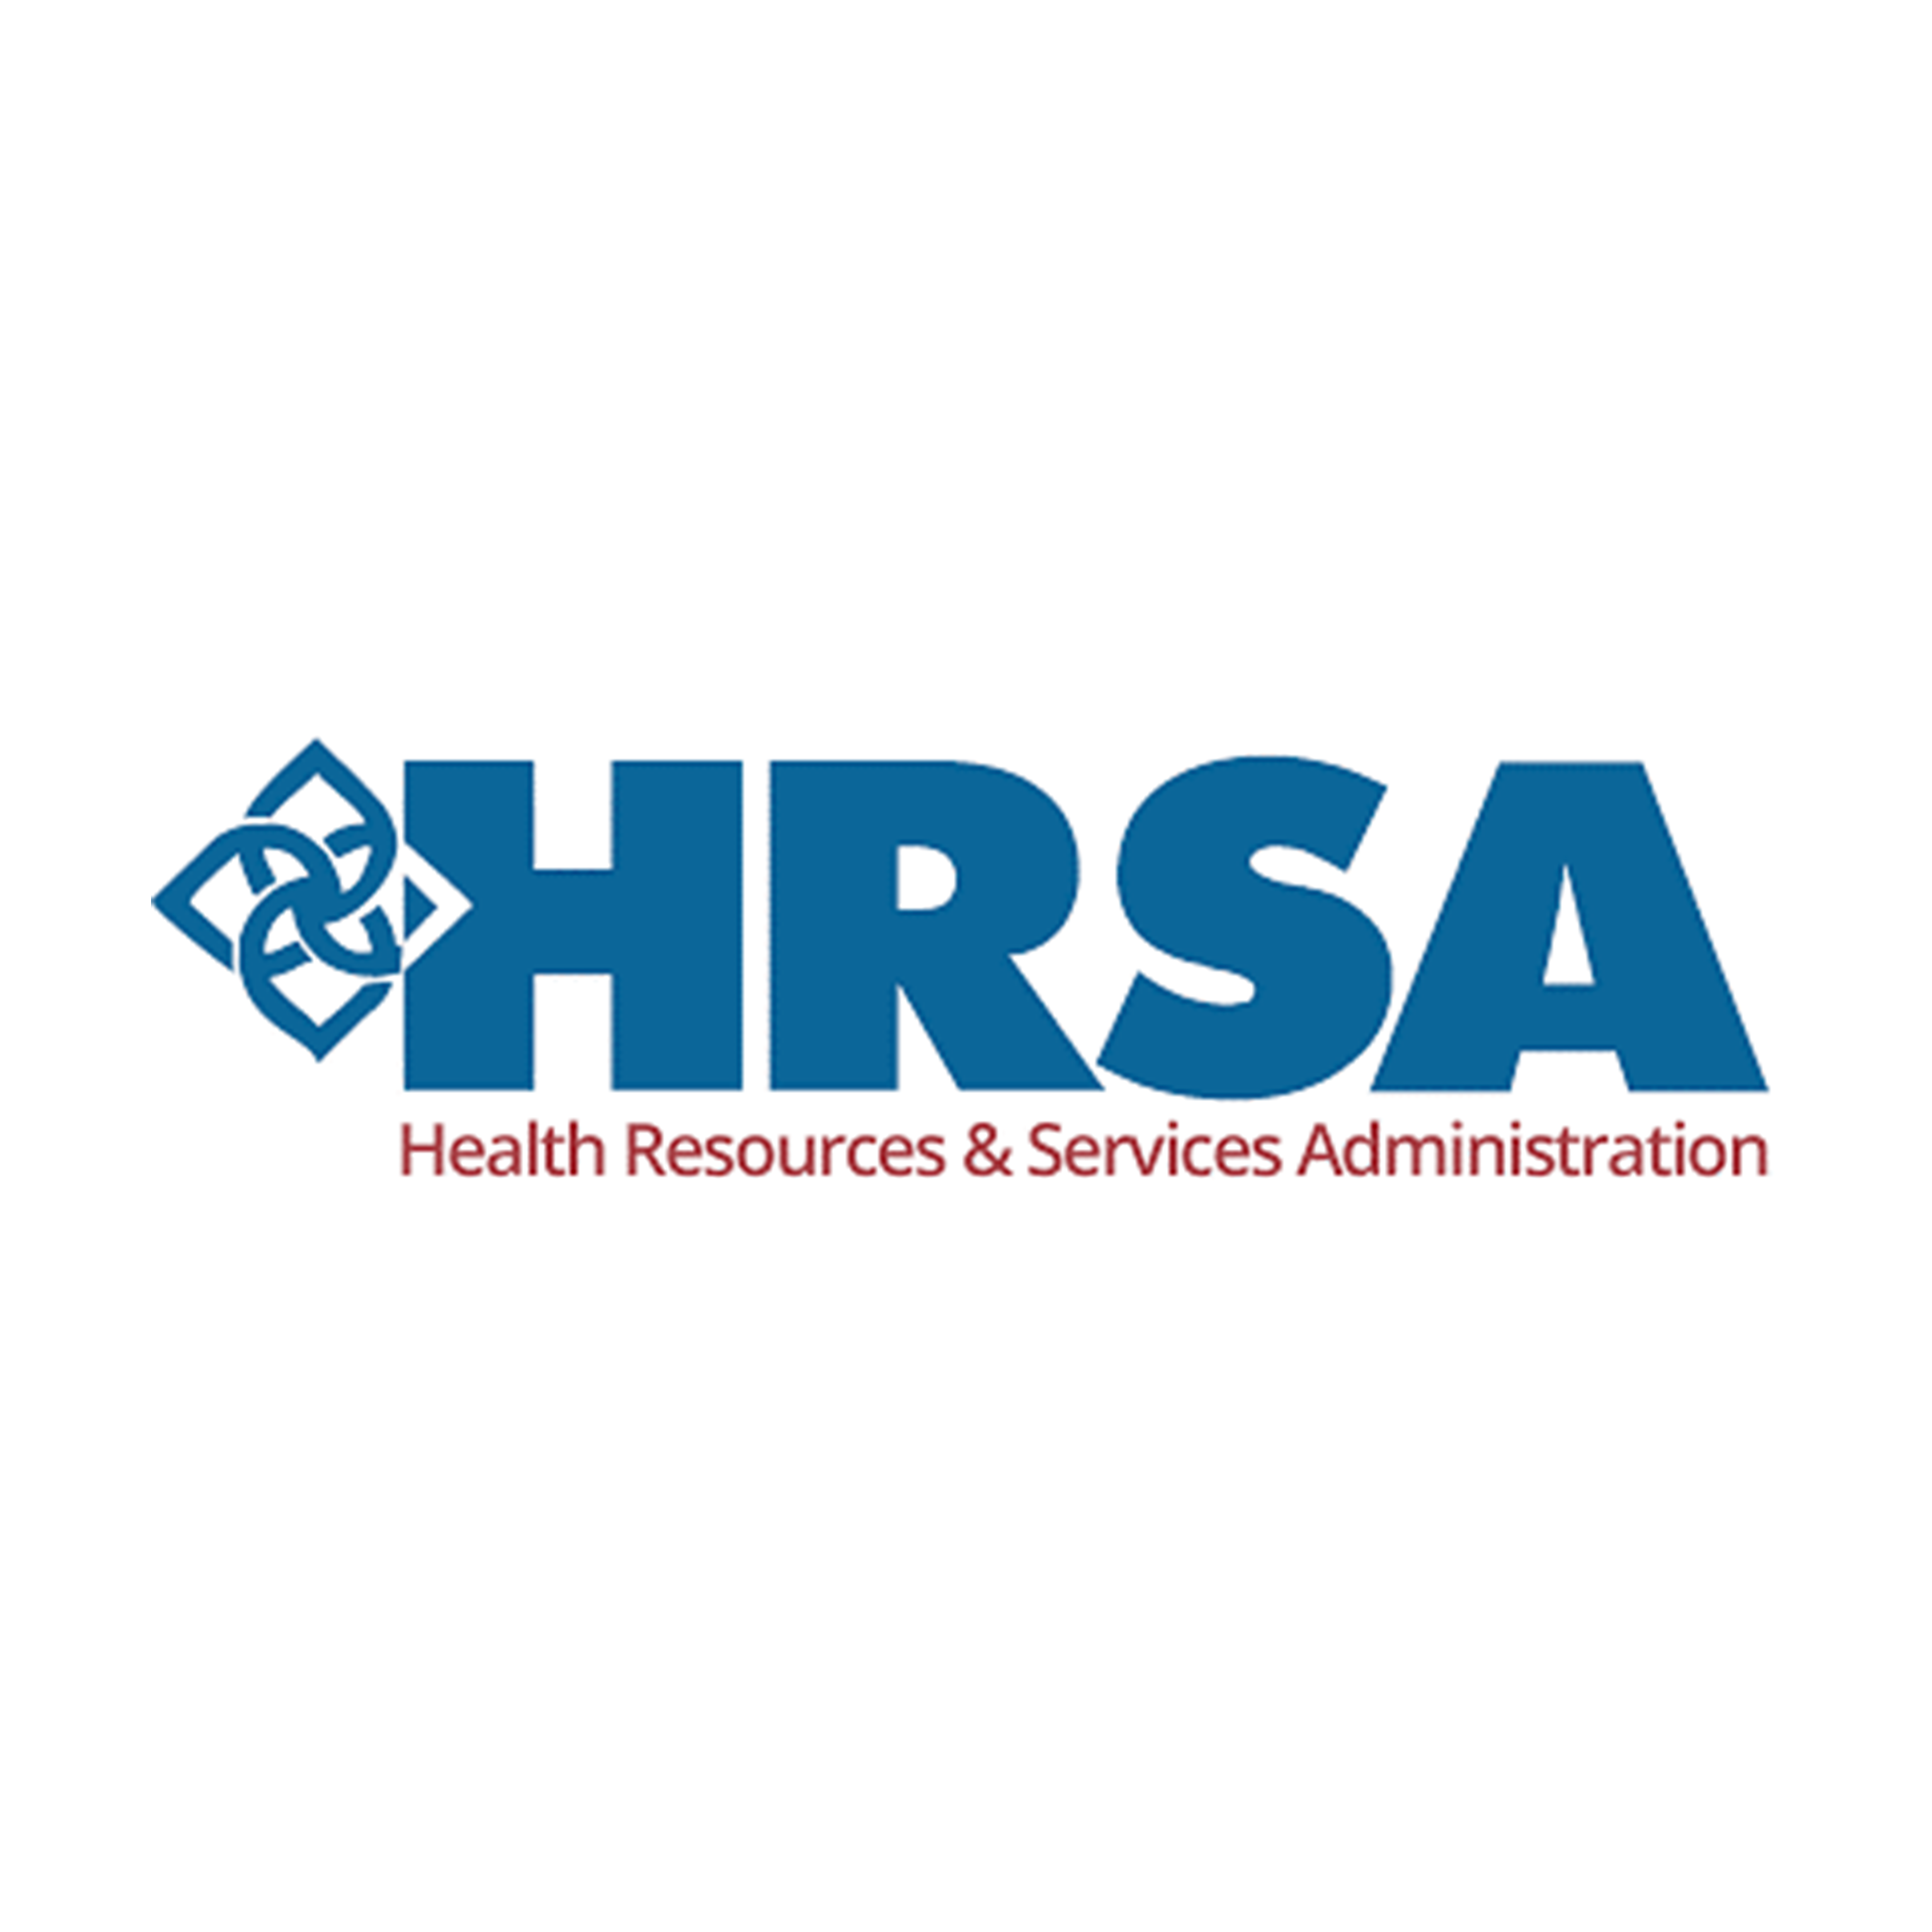 HRSA Health Resources and Services Administration